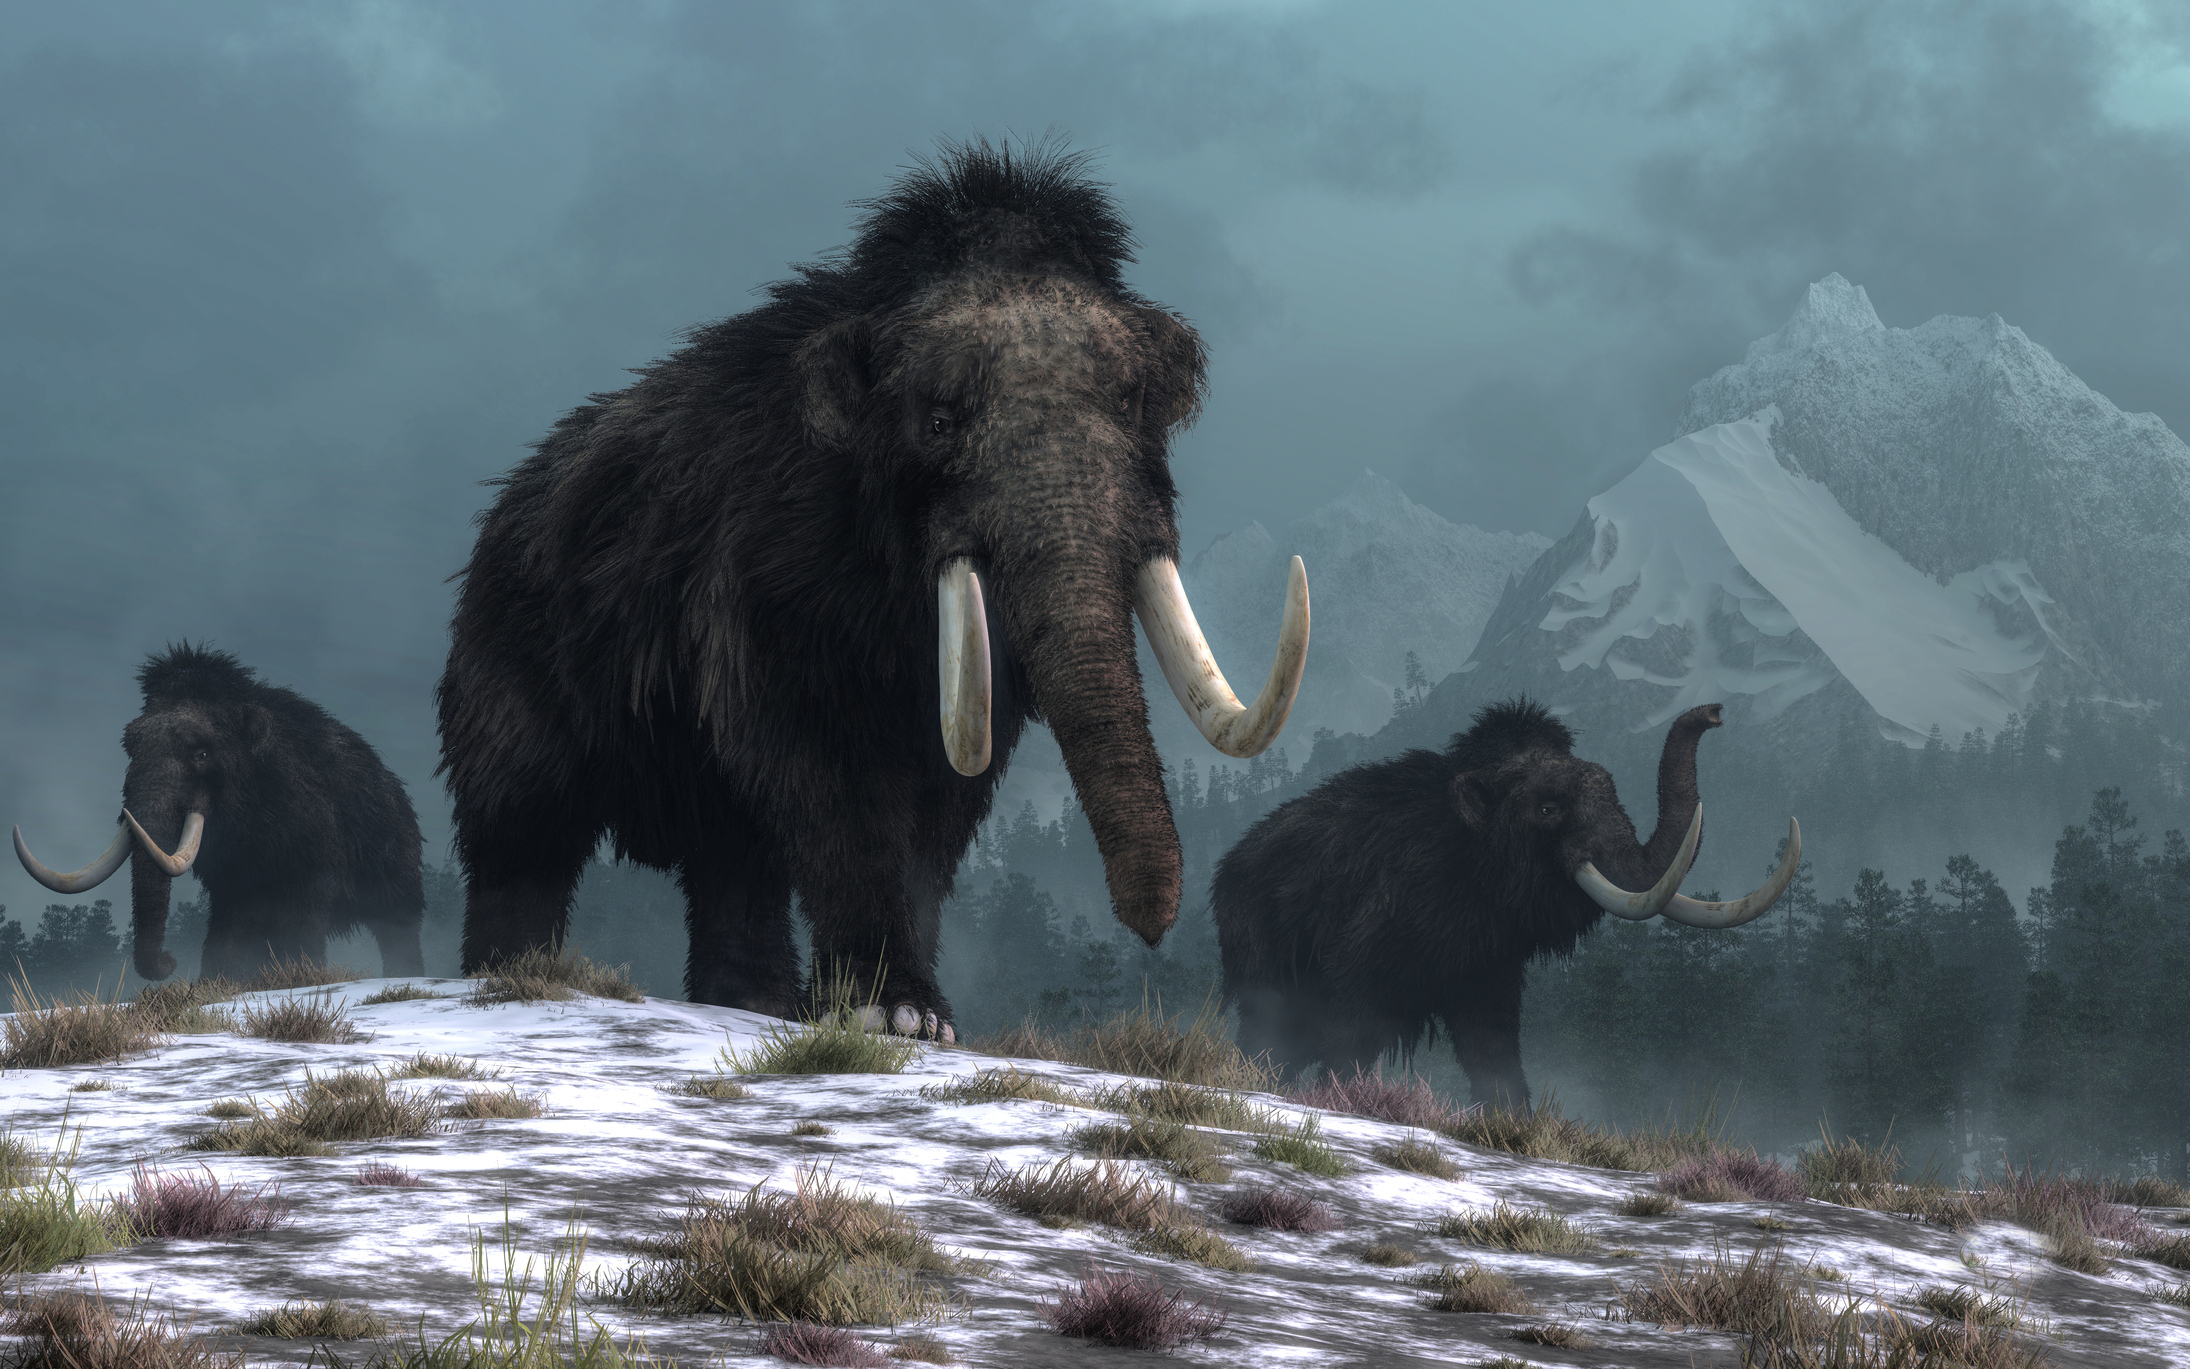 Illustration of three mammoths in a snowy landscape, evoking a sense of the Ice Age era